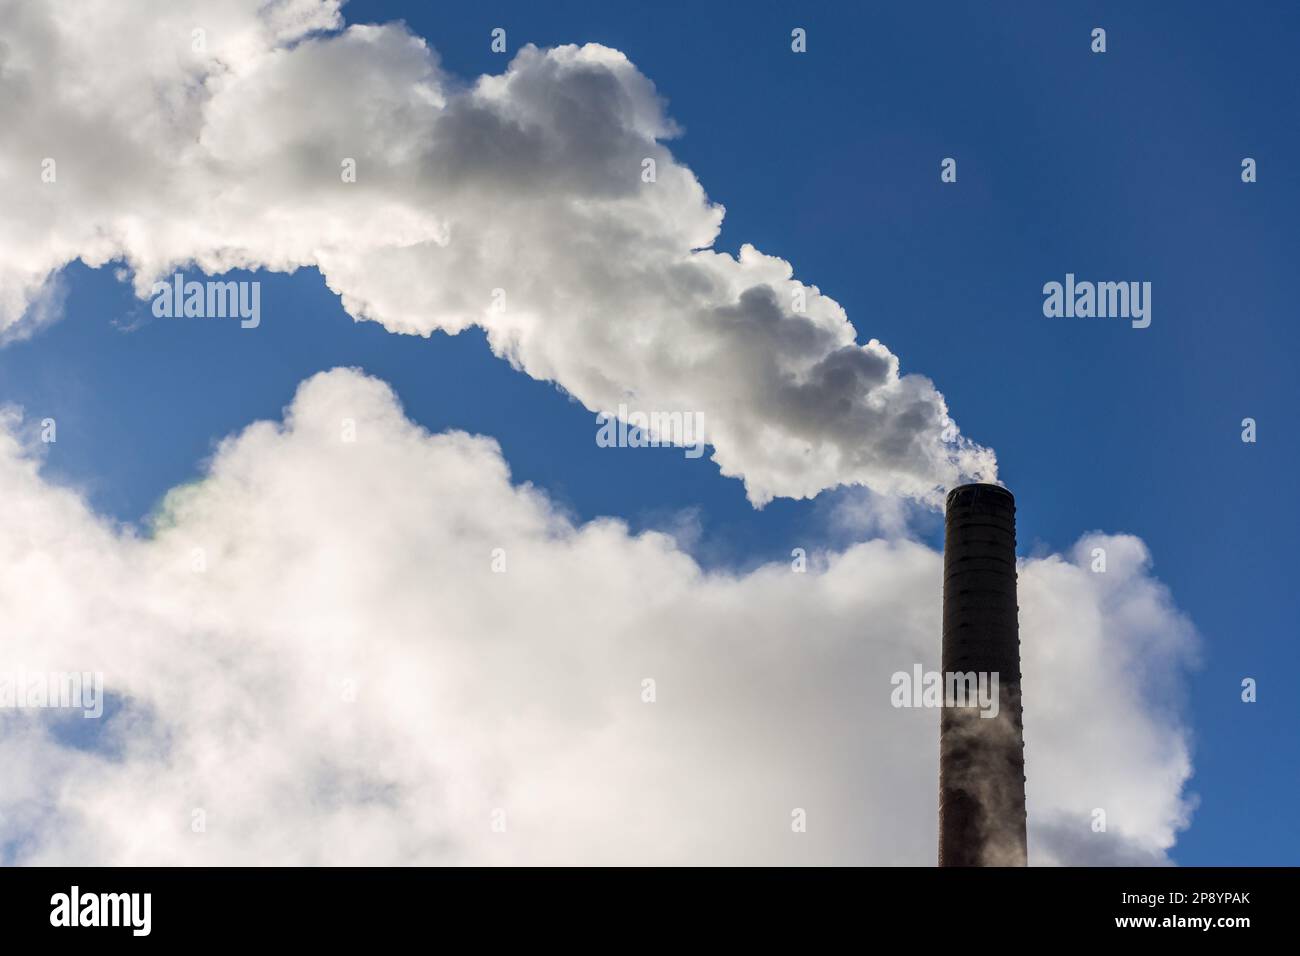 Smoke coming oit of chimney in Tampere Finland Stock Photo